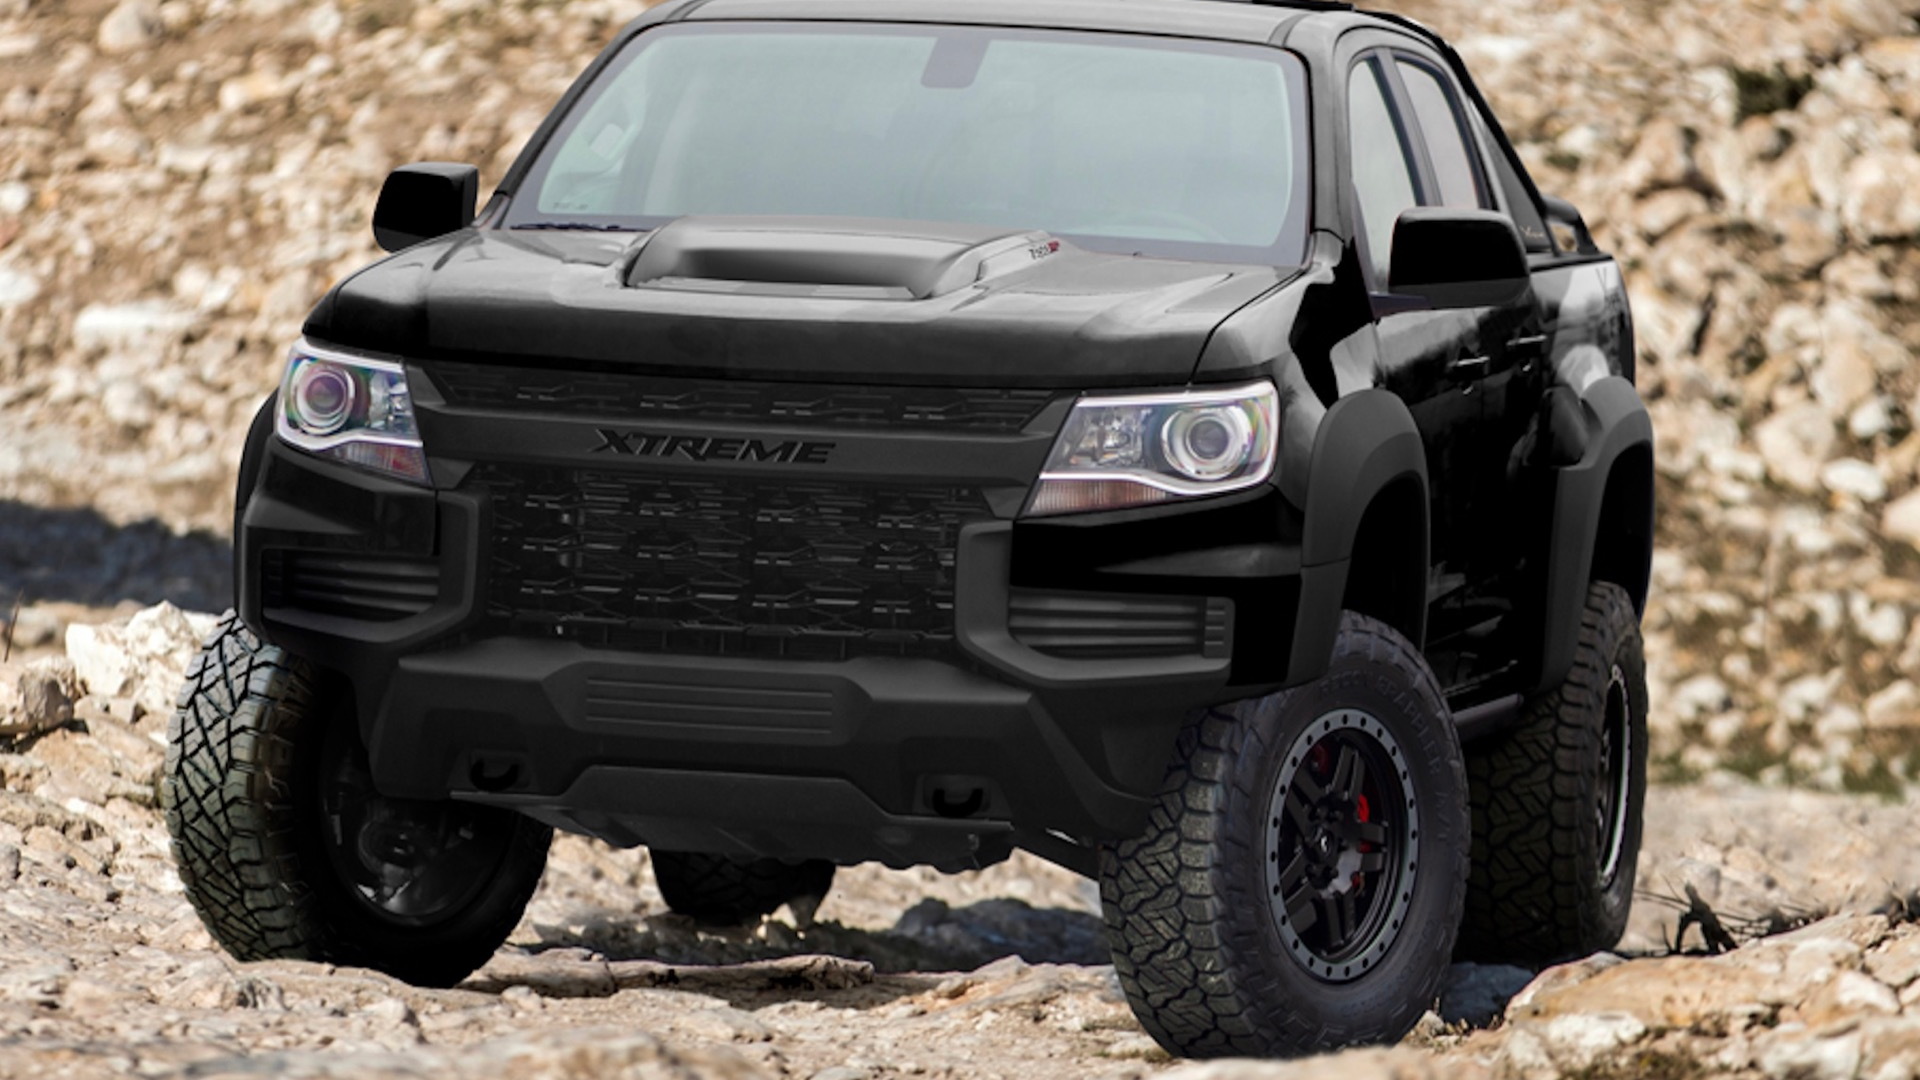 2022 Chevrolet Colorado ZR2 Xtreme Off-Road by Specialty Vehicle Engineering